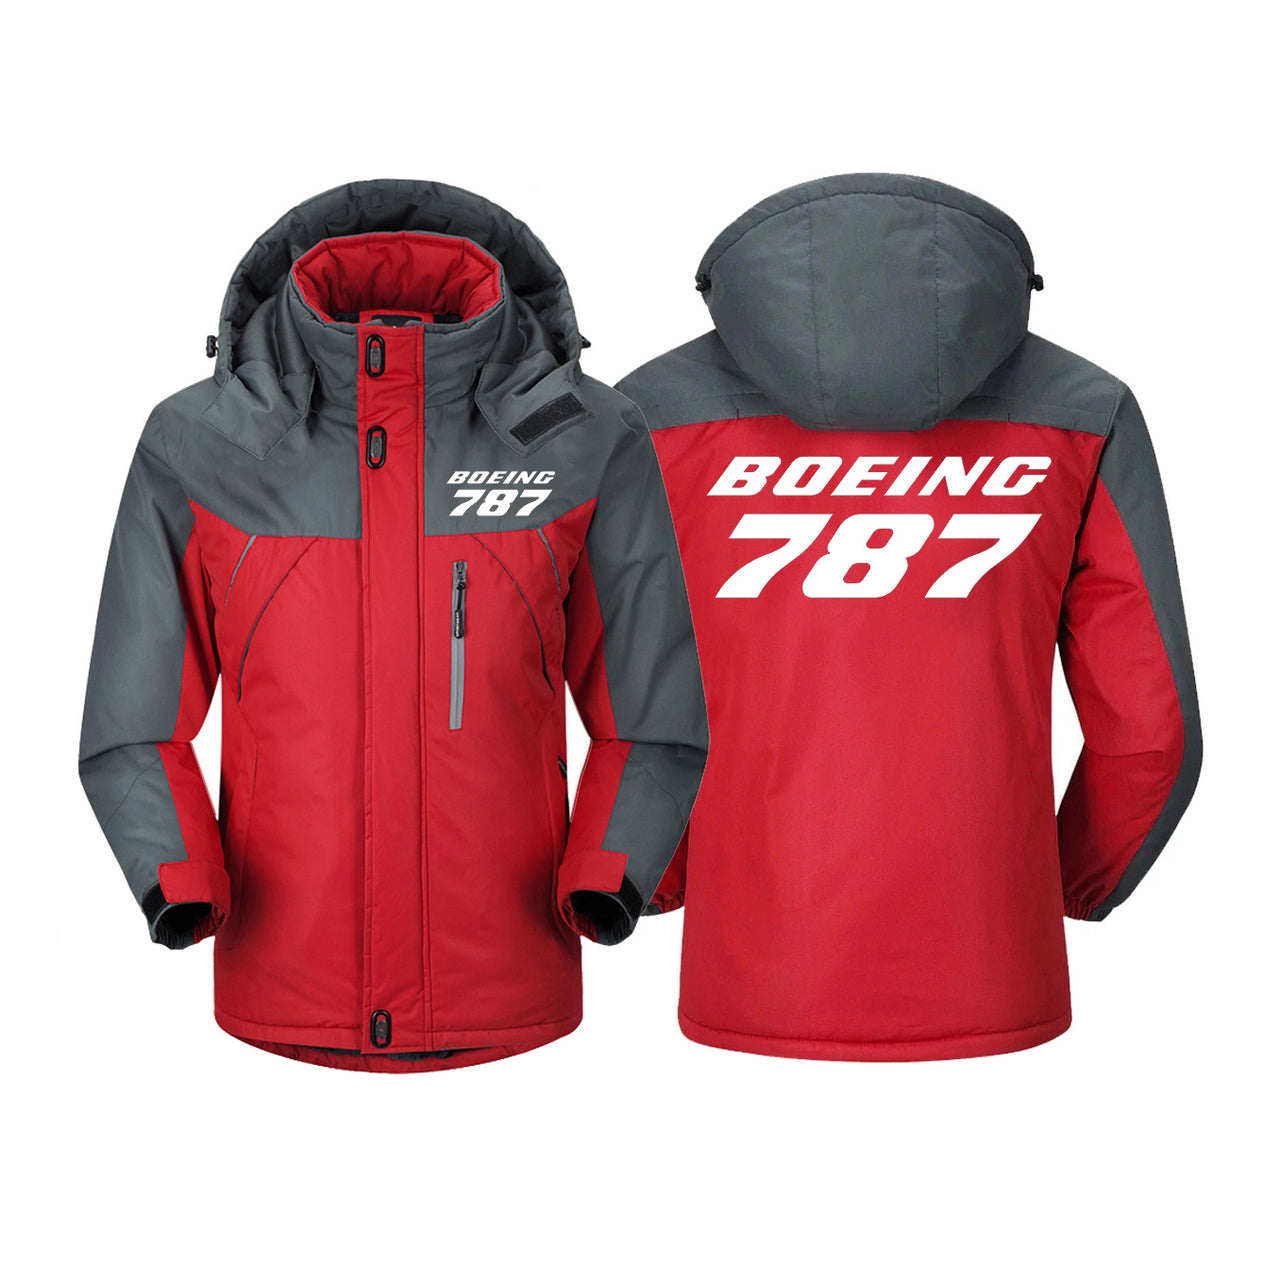 Boeing 787 & Text Designed Thick Winter Jackets